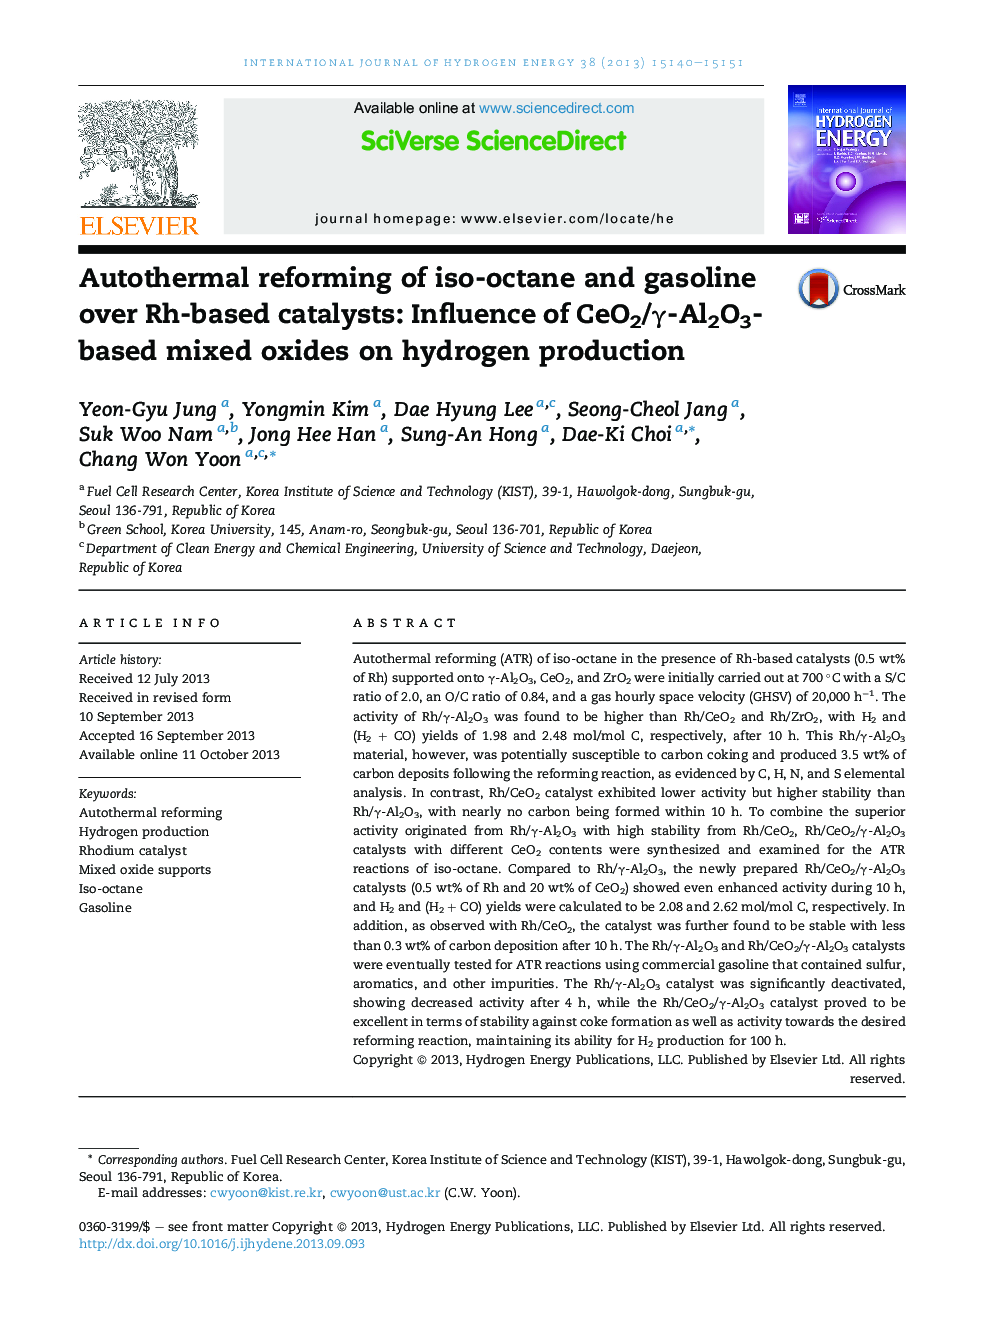 Autothermal reforming of iso-octane and gasoline over Rh-based catalysts: Influence of CeO2/Î³-Al2O3-based mixed oxides on hydrogen production